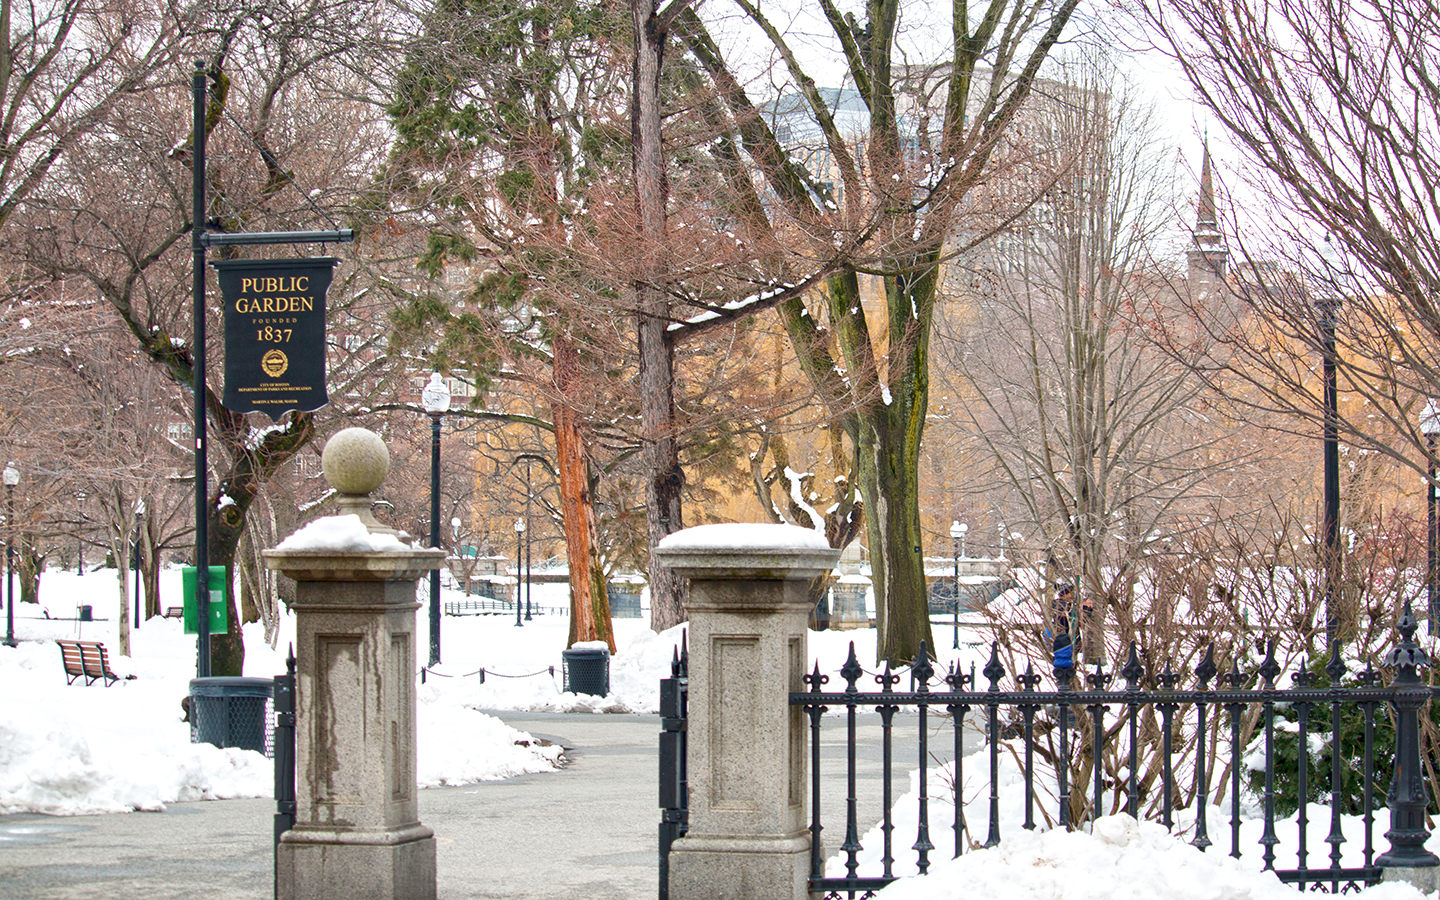 The entrance to the Boston Gardens with new snow